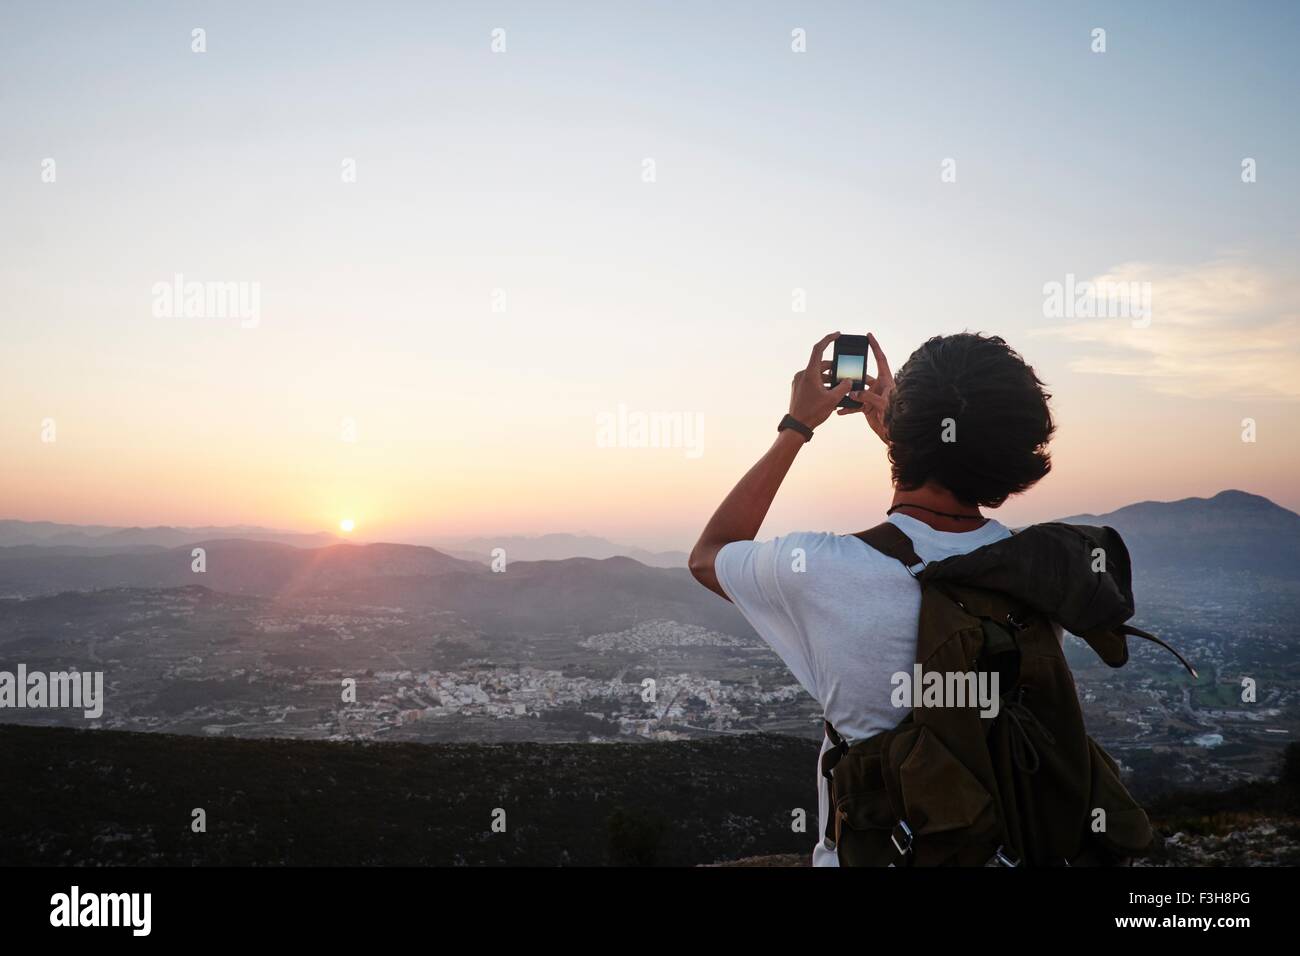 Rear view of young man photographing landscape and sunset on smartphone, Javea, Spain Stock Photo